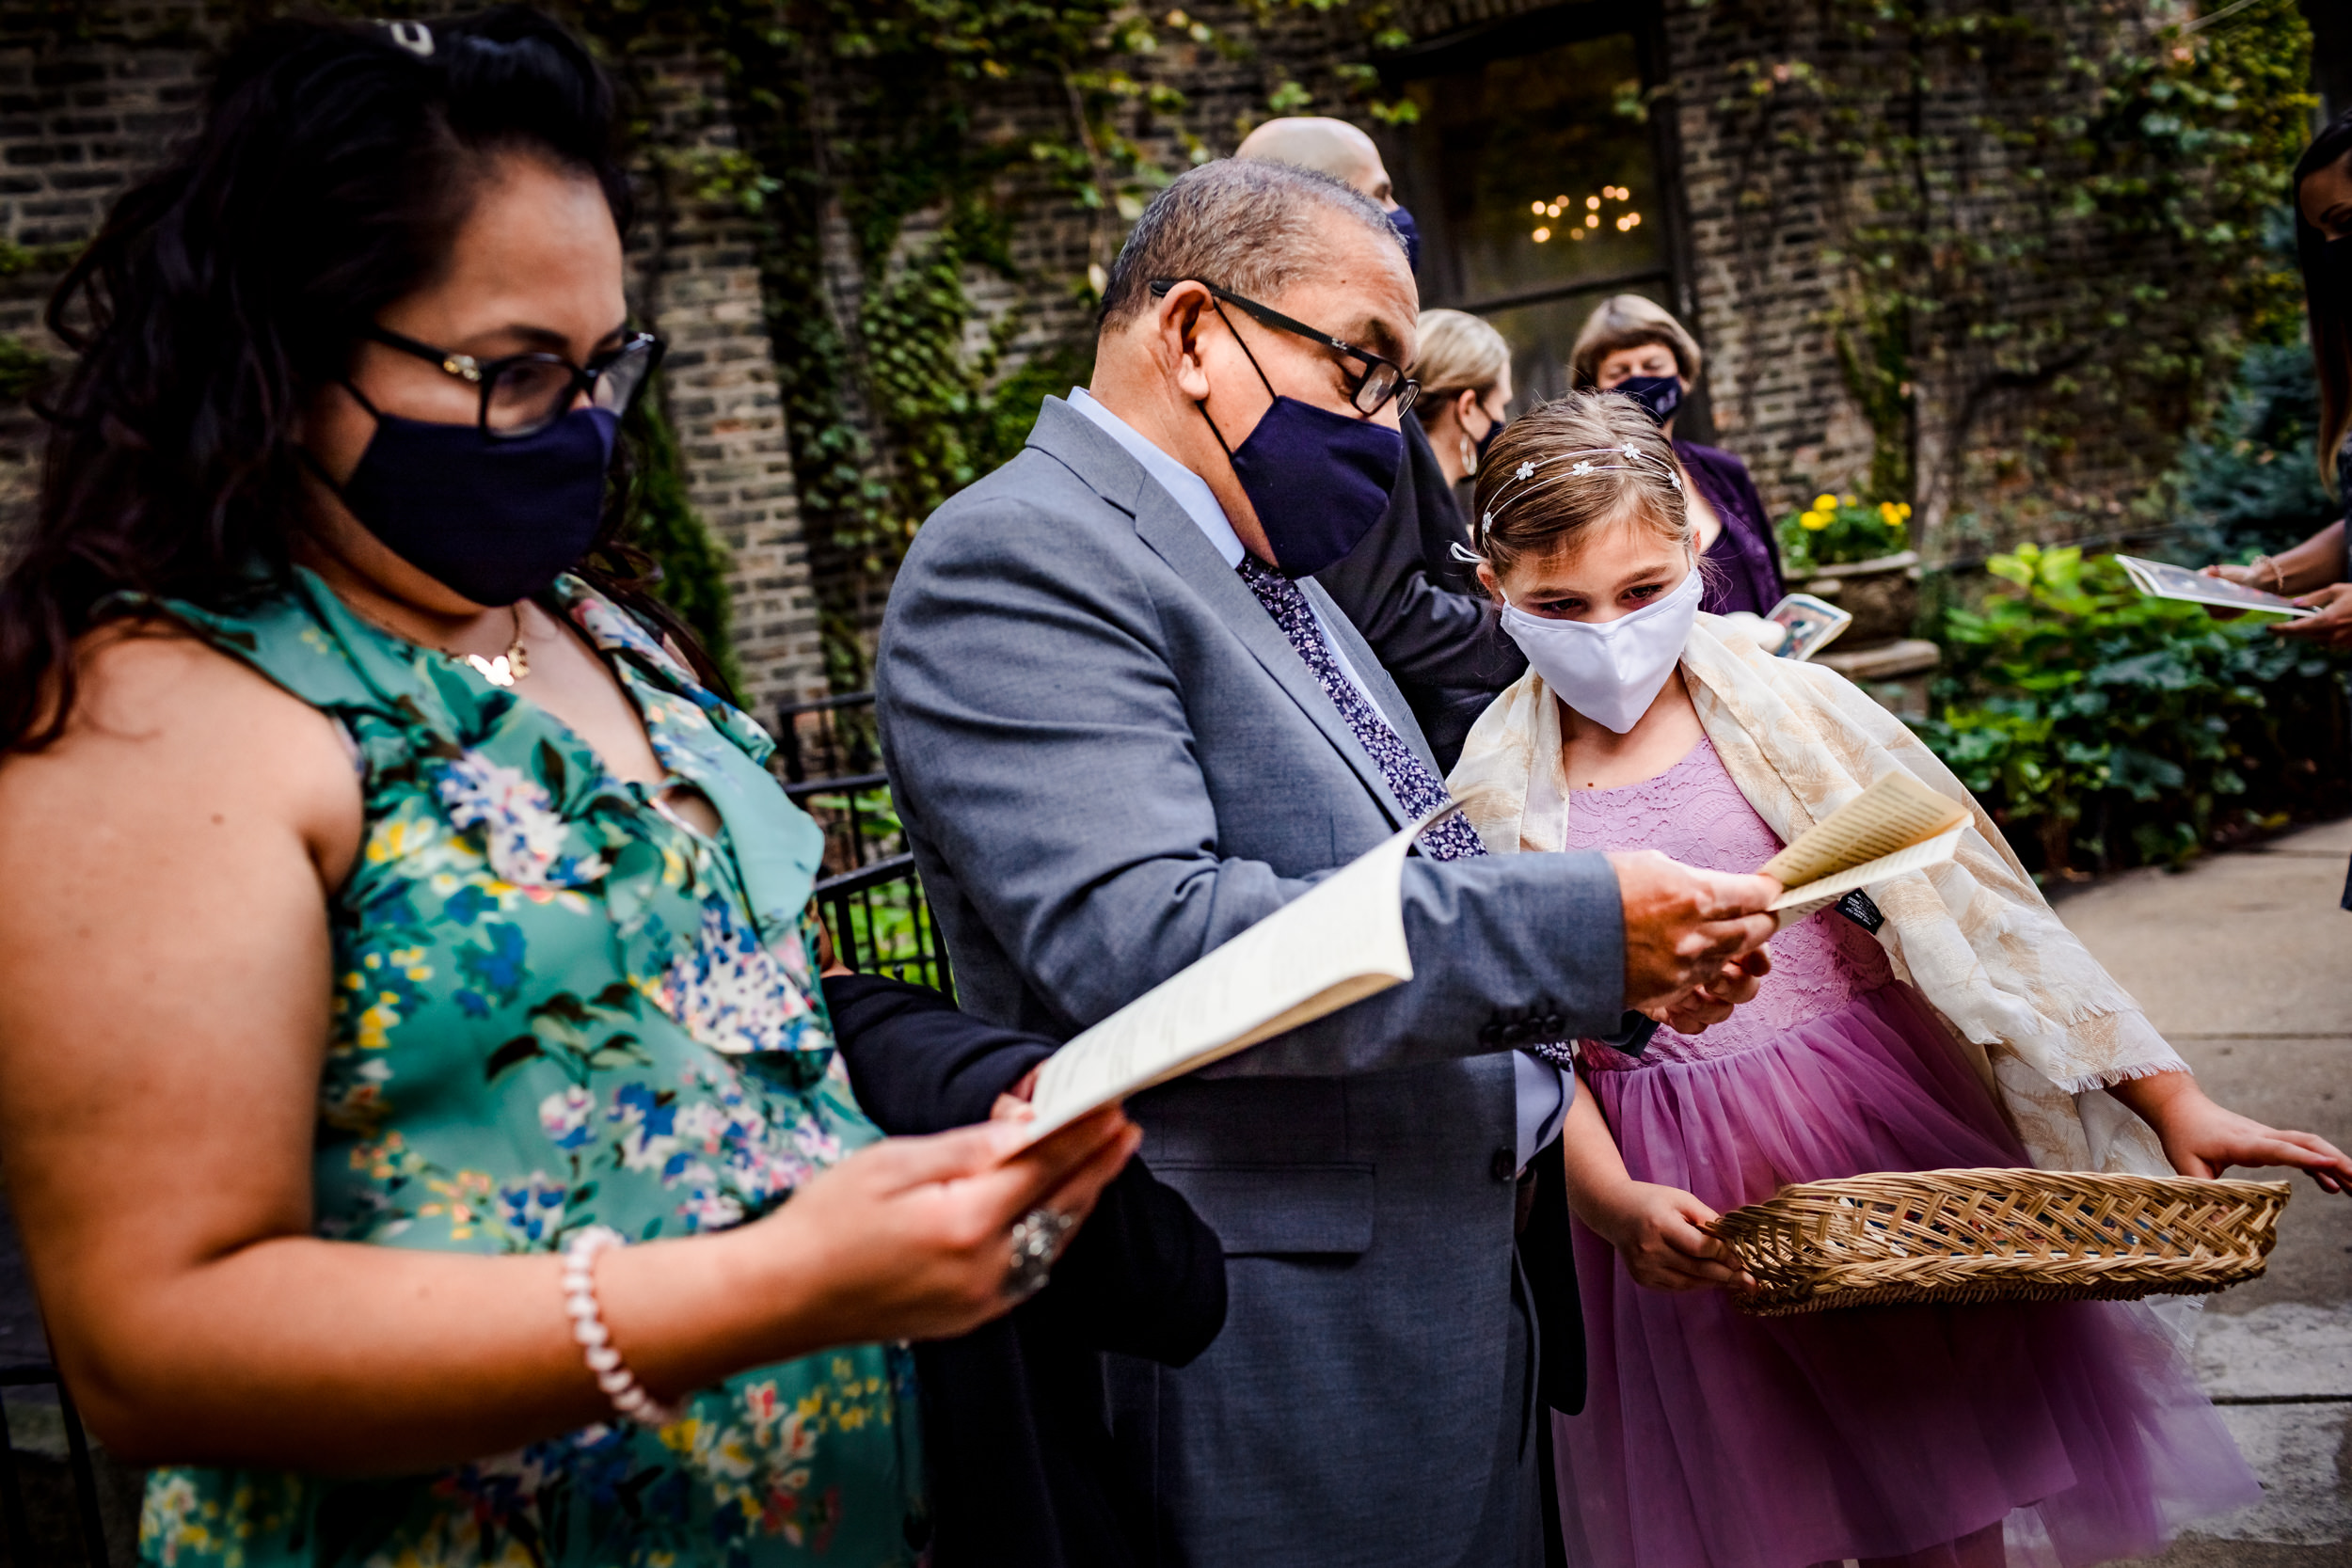 Guests read programs before a wedding ceremony at the Church of the Ascension garden wedding in downtown Chicago.